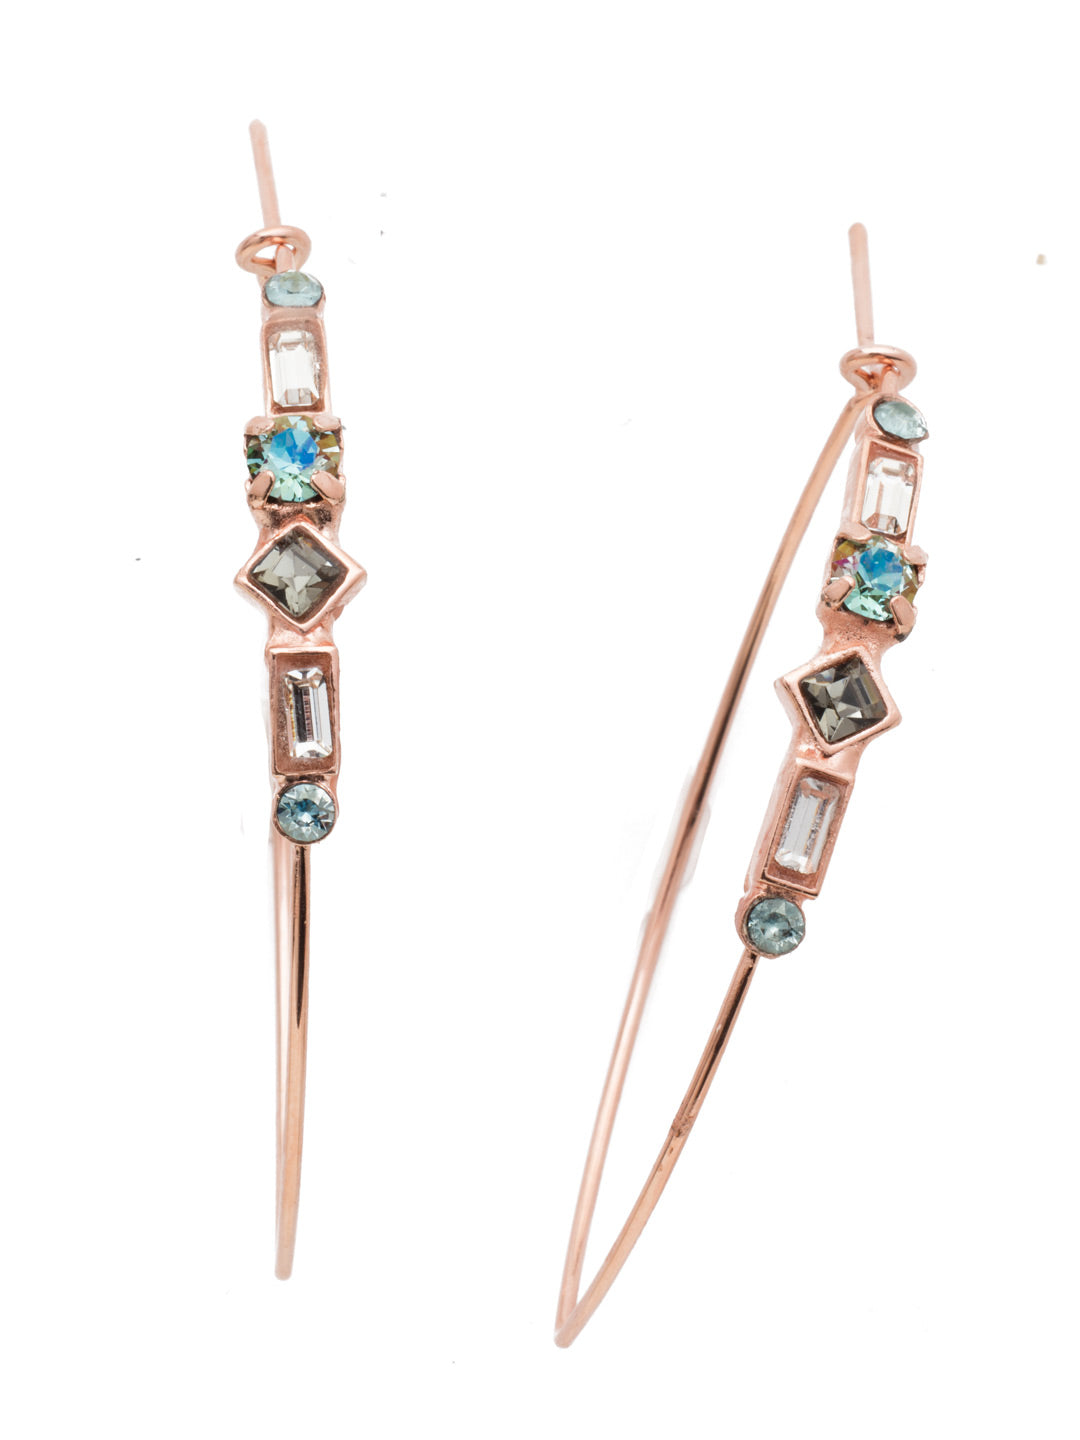 Regina Hoop Earrings - EET54RGCAZ - Take your hoop game up a notch with the Regina Hoop Earrings. The delicate loop of metal is affixed with a mix of sparkling crystals in fun shapes including baquette, diamond and round pieces. From Sorrelli's Crystal Azure collection in our Rose Gold-tone finish.